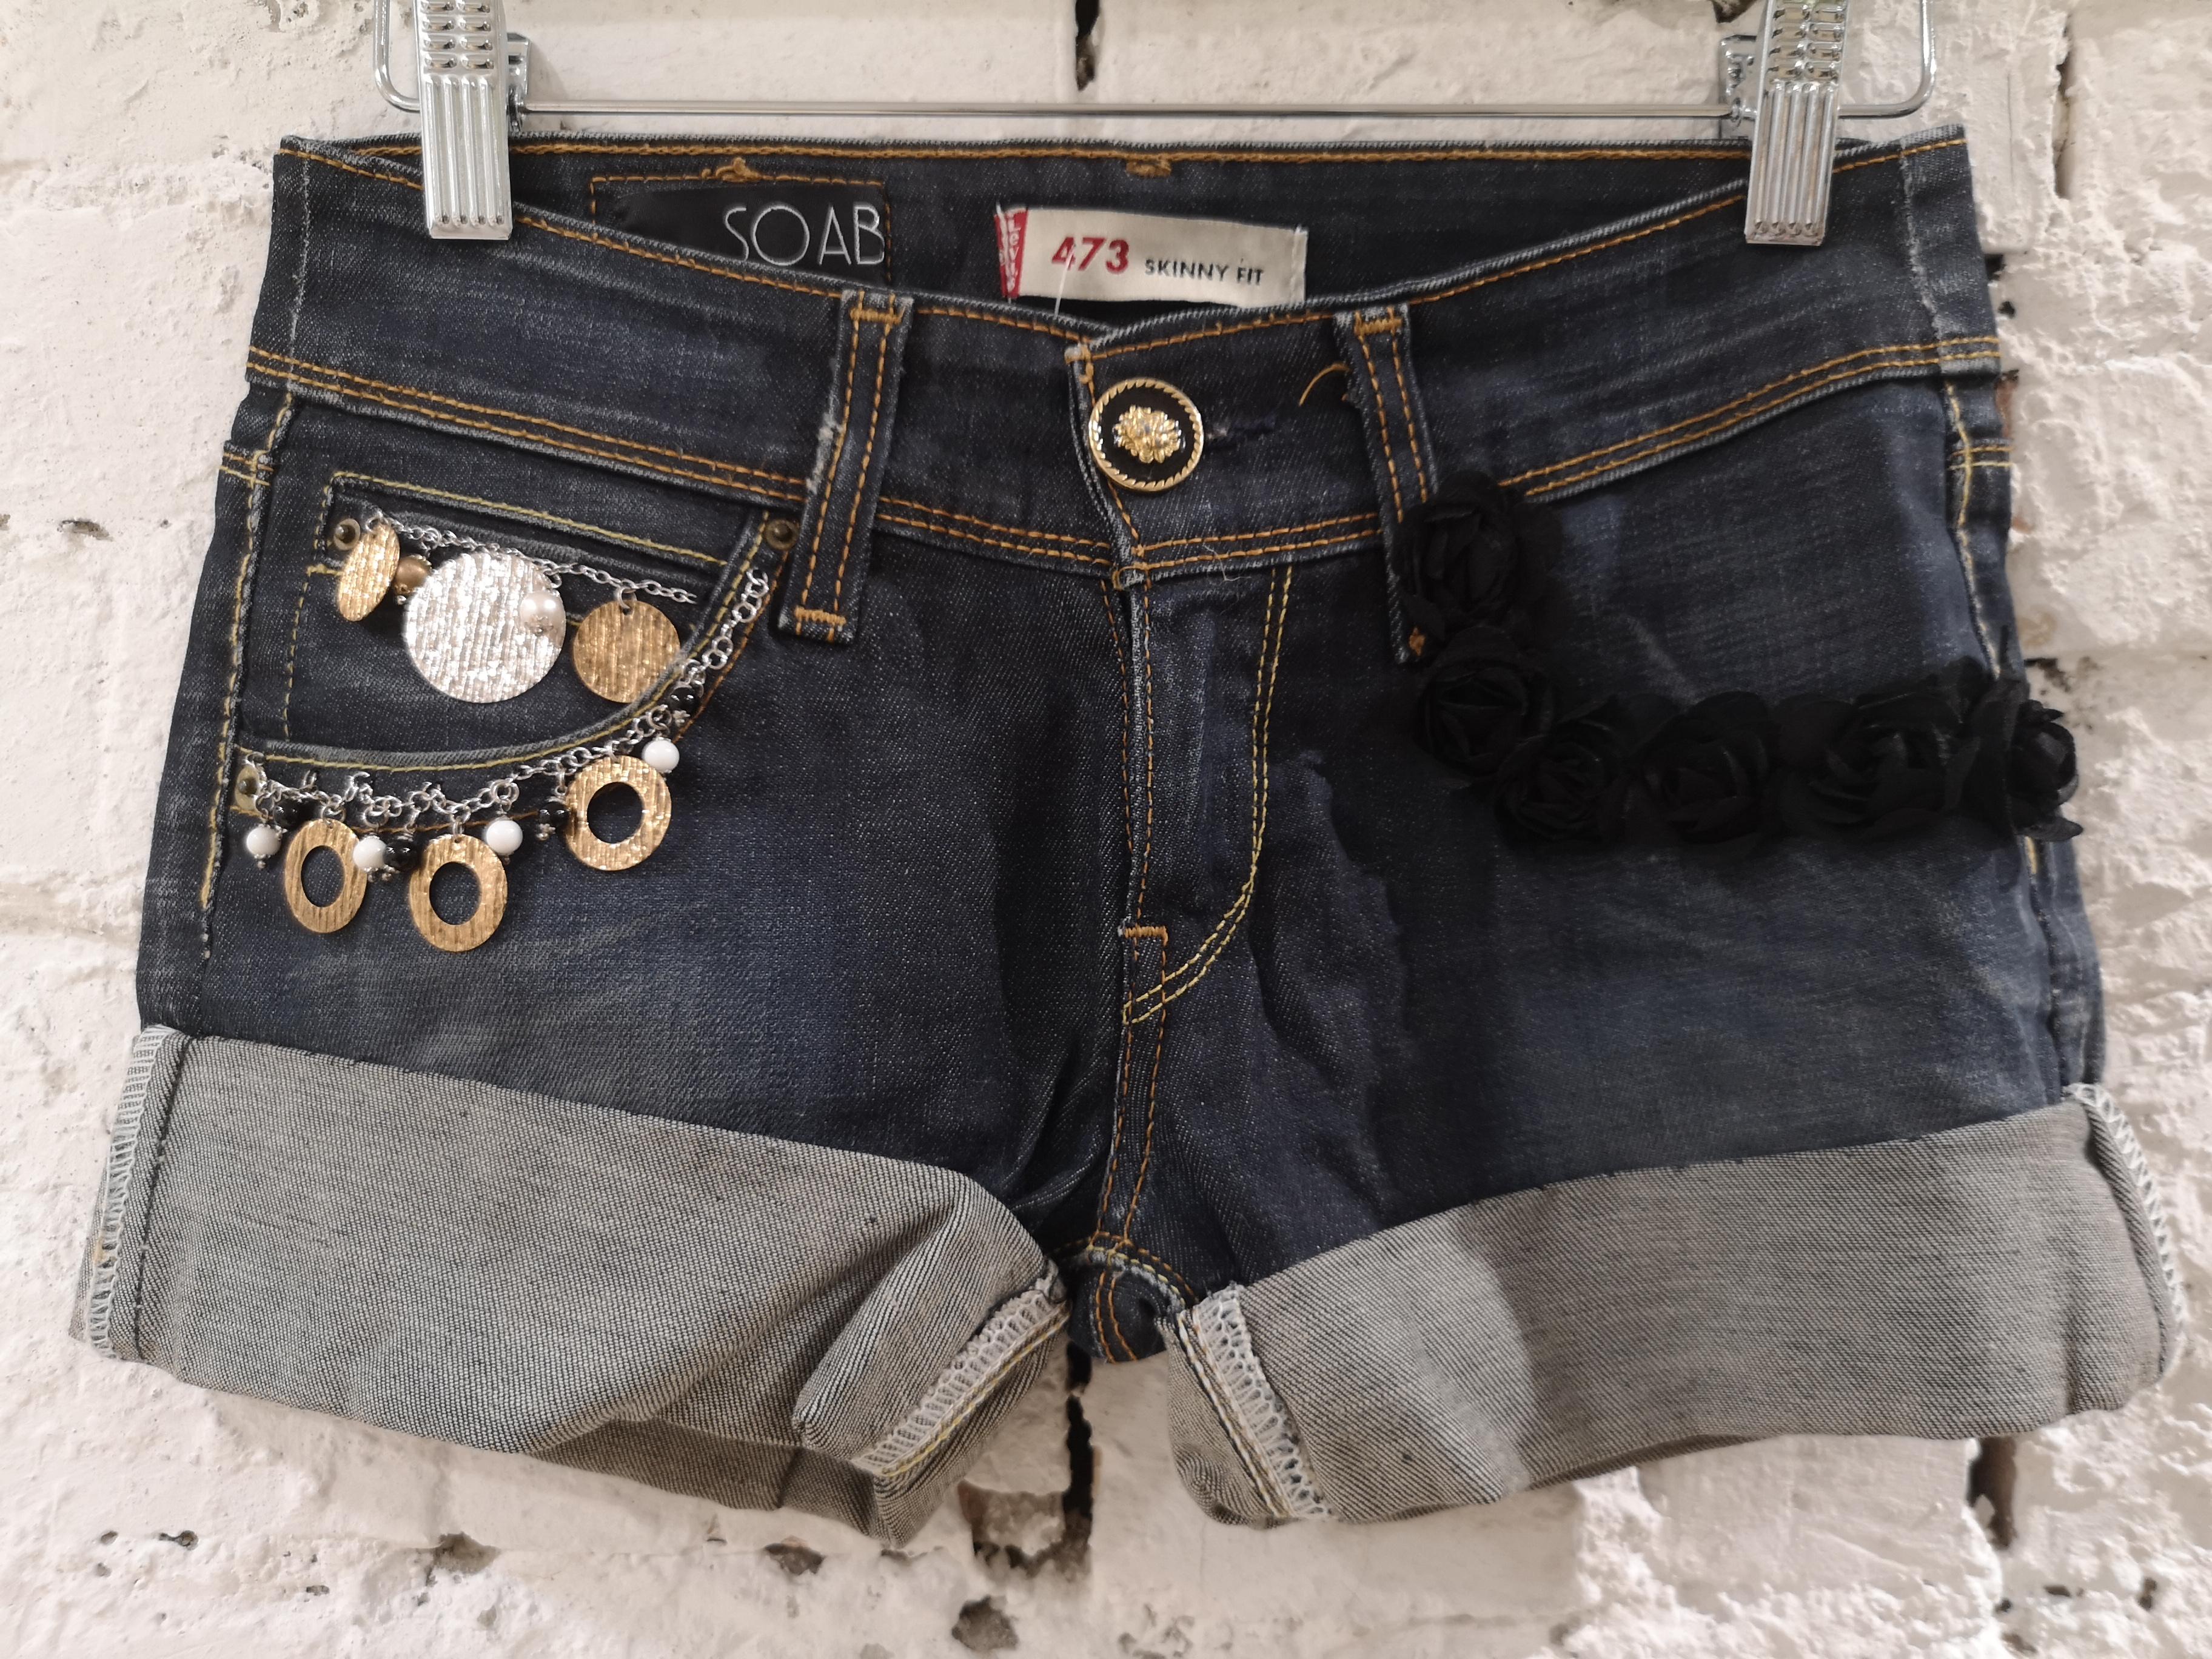 SOAB Denim skinny with bijoux shorts
totally handmade on a recycled denim
measurements
waist 70 cm
lenght 25 cm